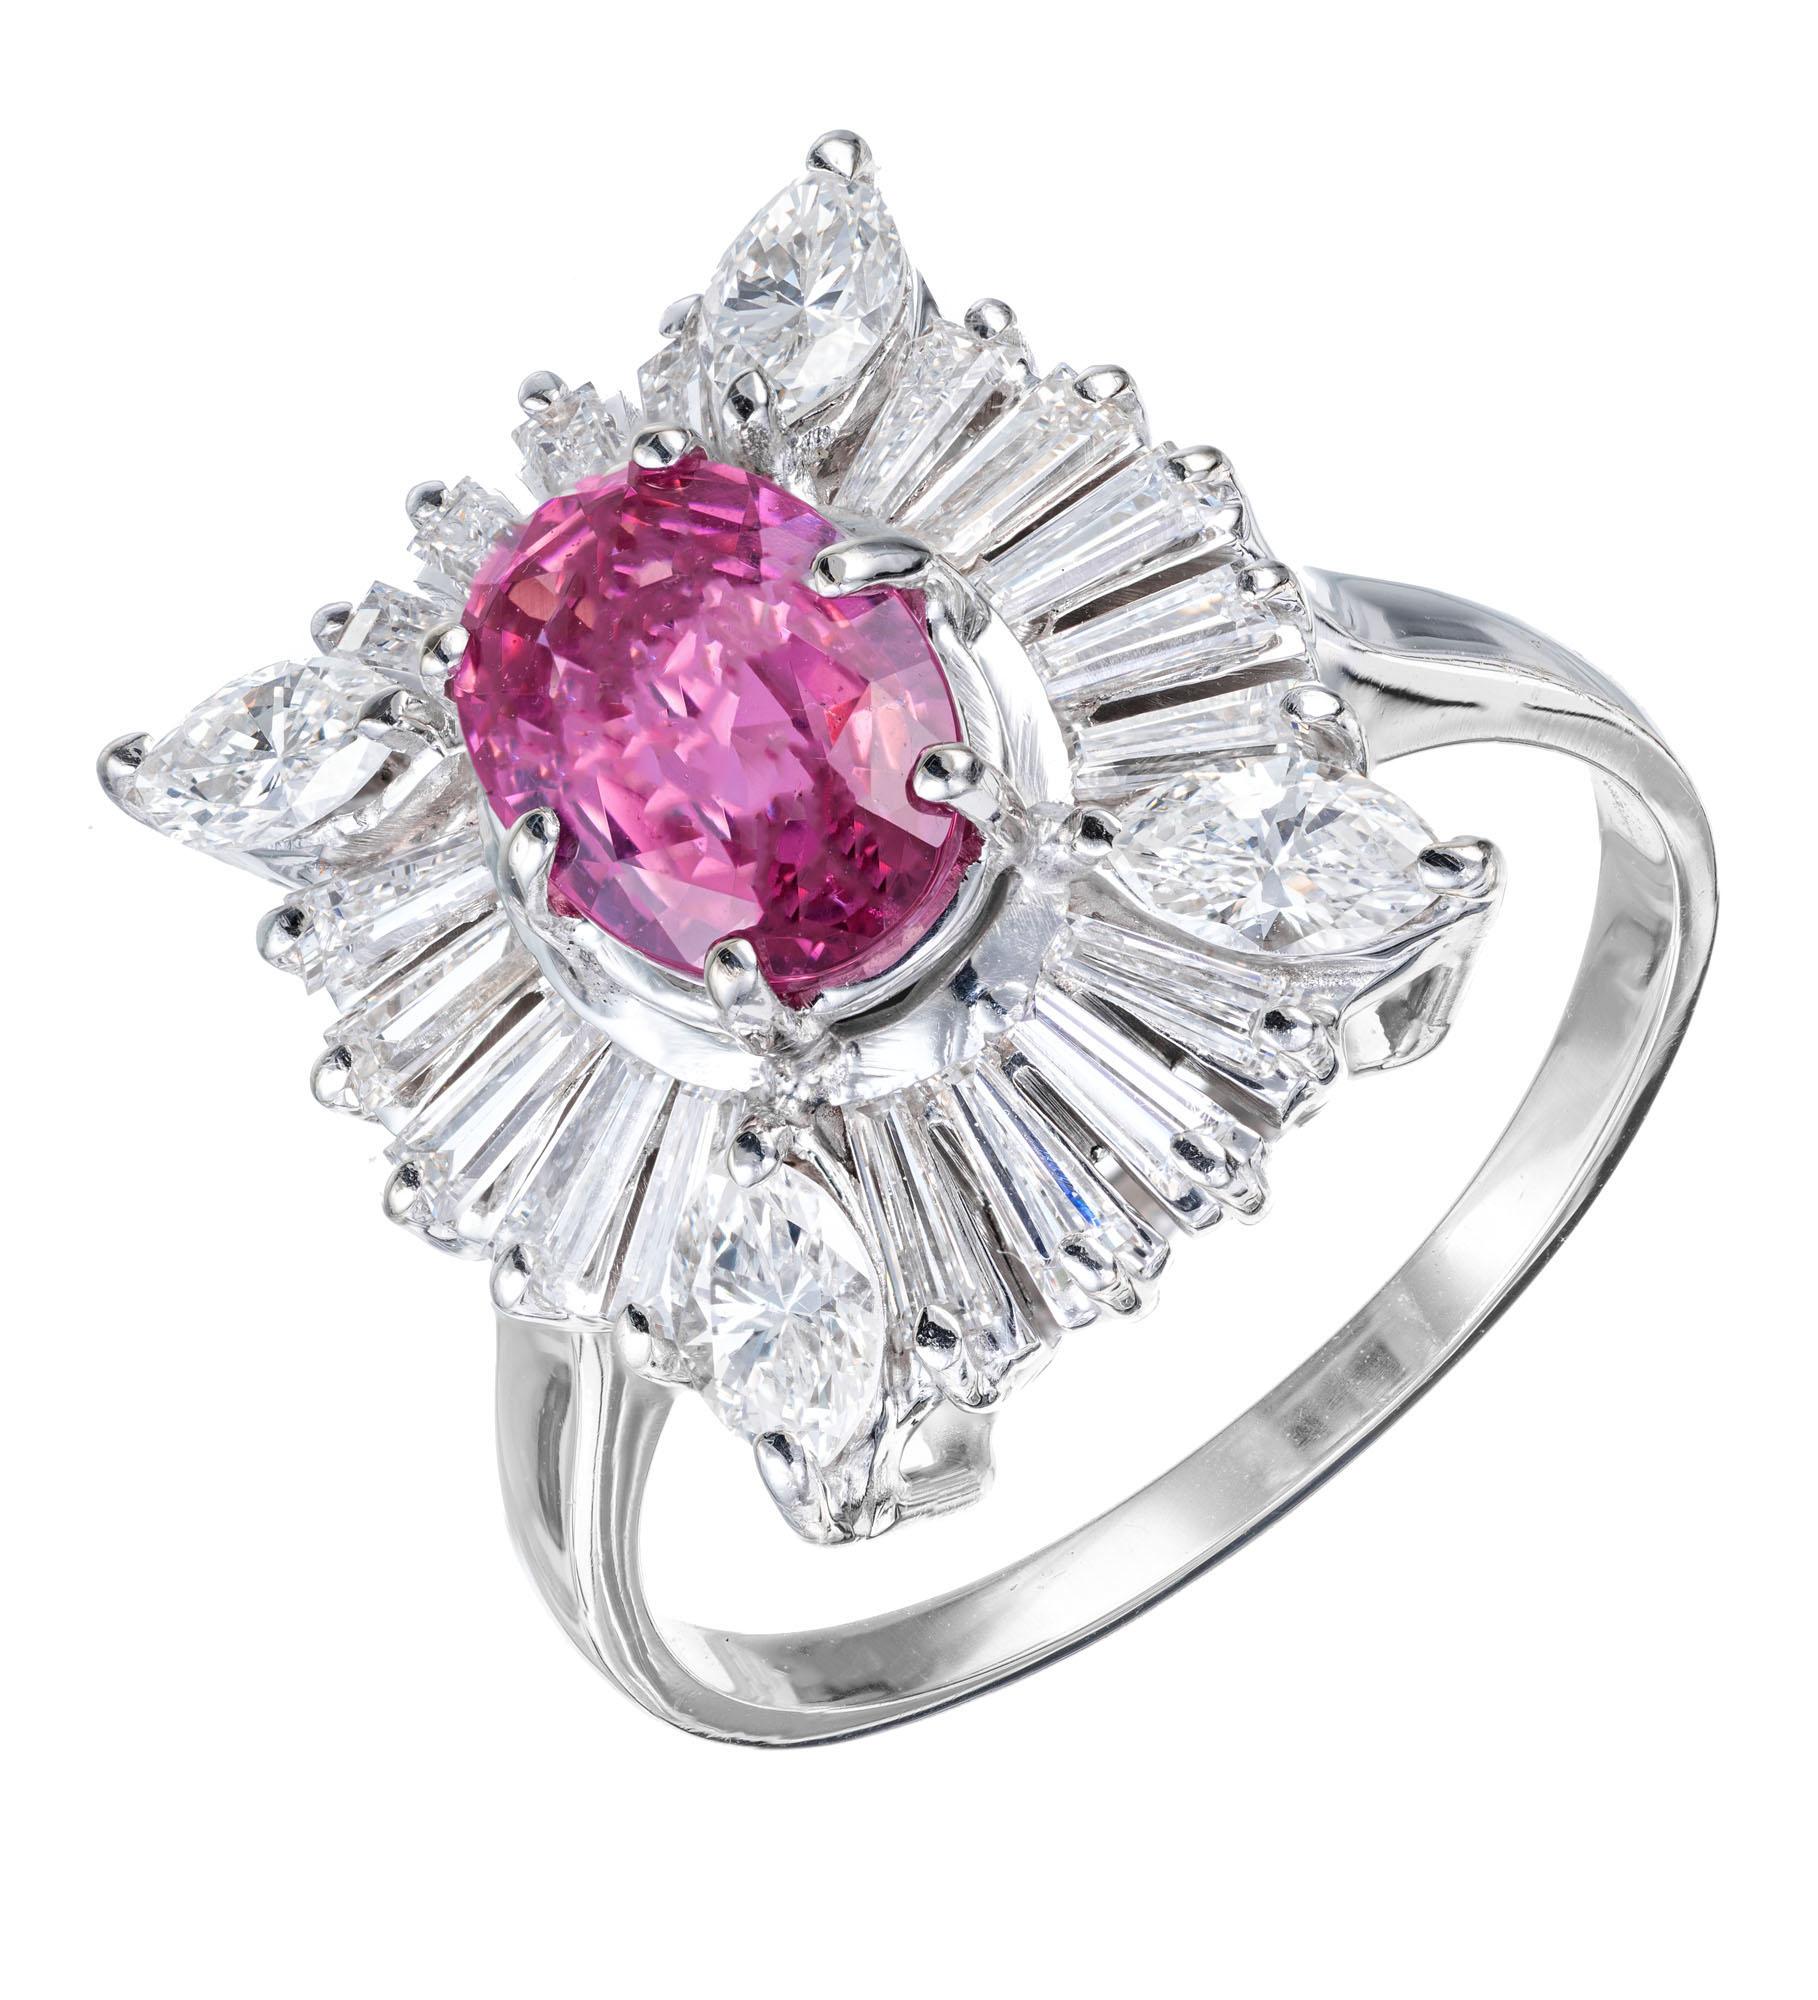 1950's pink sapphire and diamond engagement ring. GIA certified 1.50ct oval pink sapphire center stone set in 14k white gold with a halo of tapered baguette and marquise diamonds. GIA certified natural corundum, simple heat only, no other